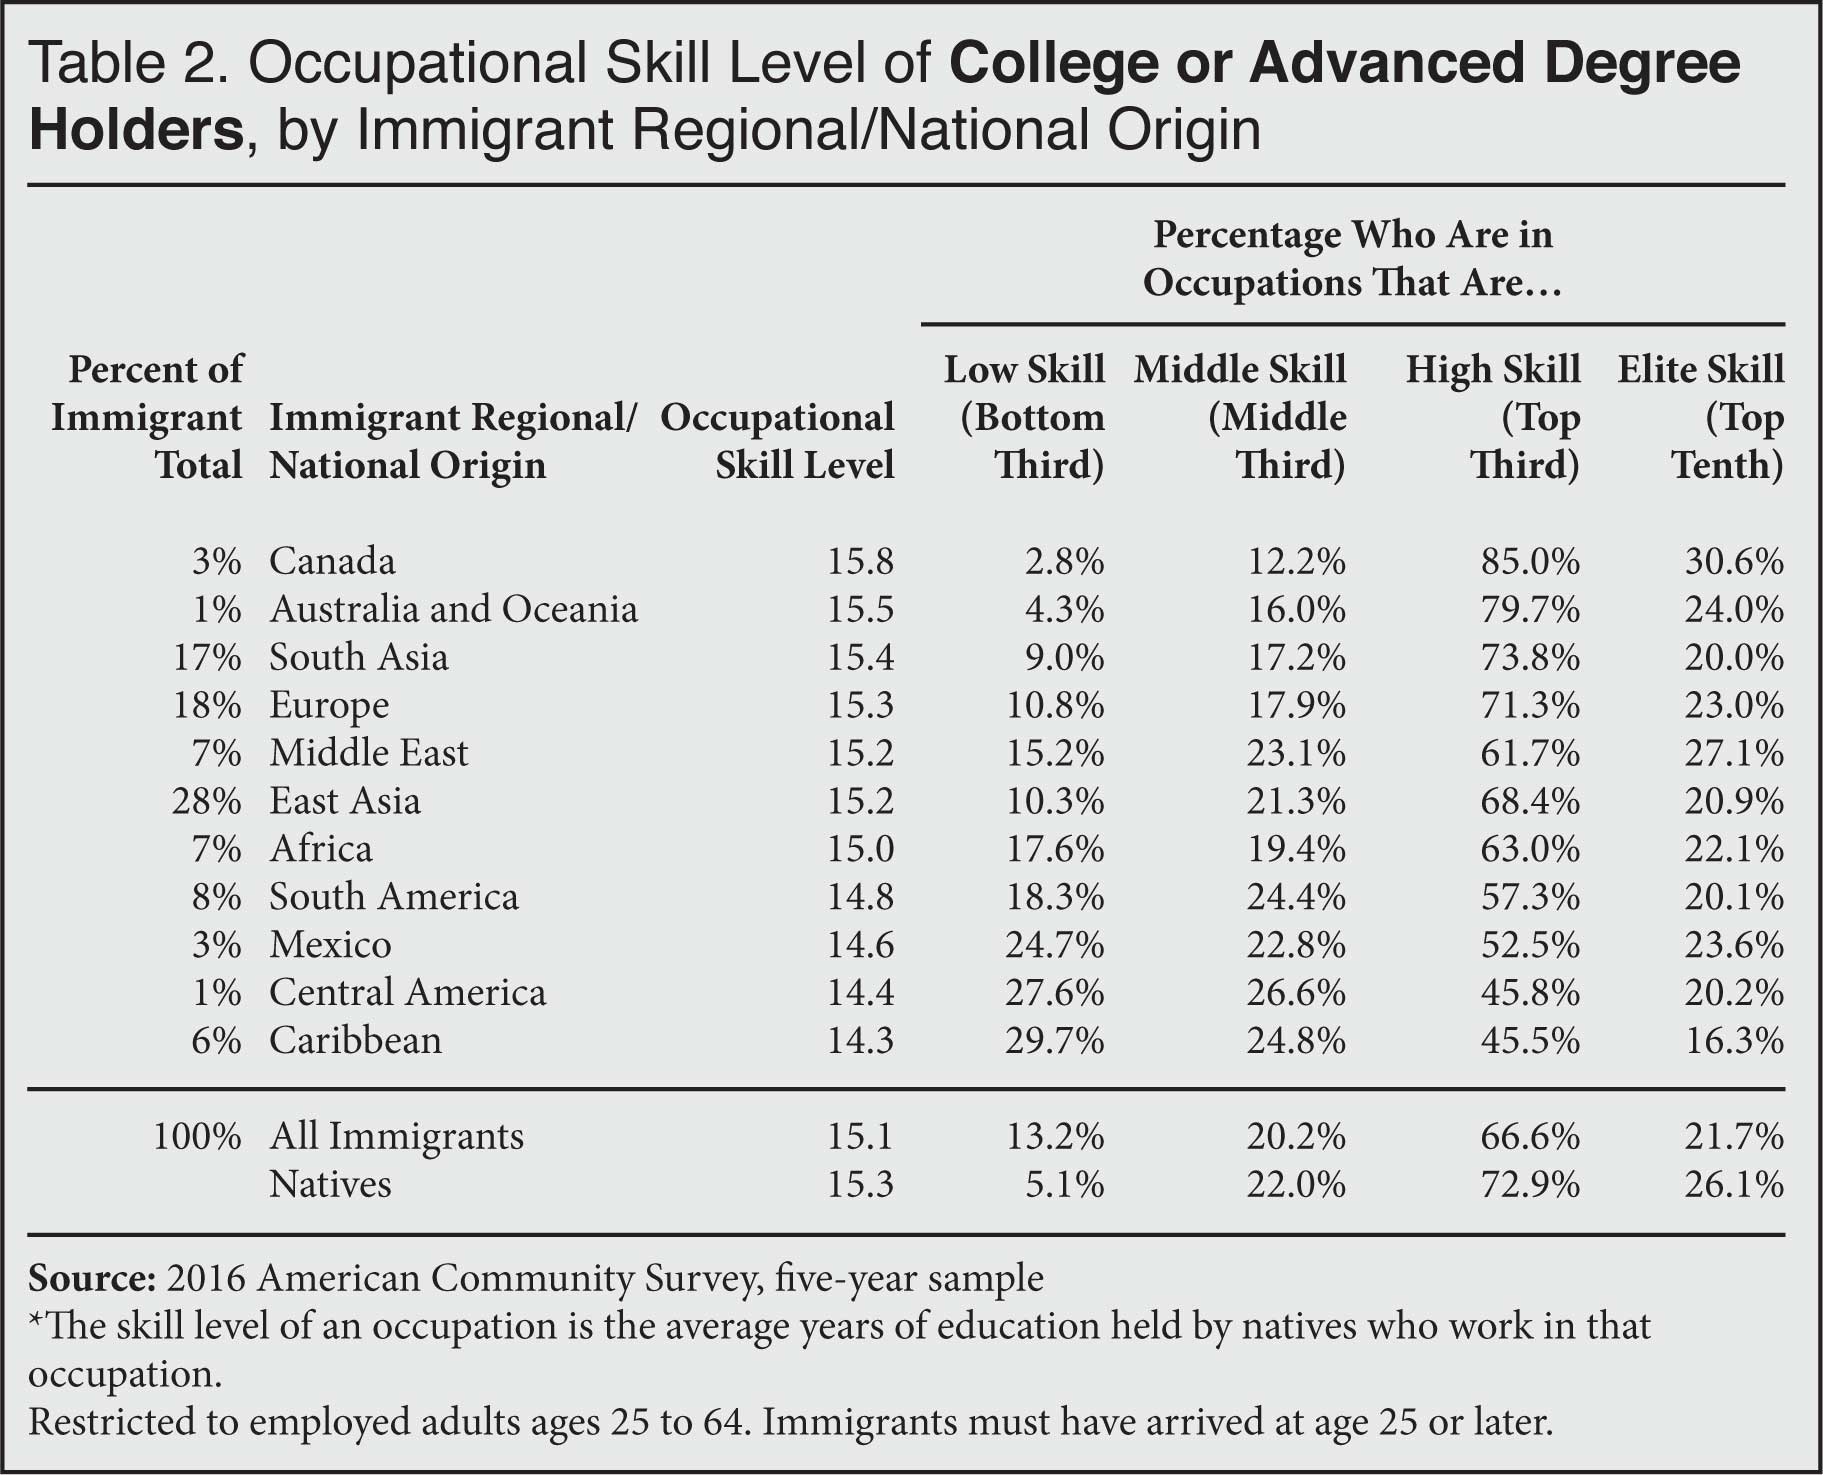 Table: Occupational Skill Level of College or Advanced Degree Holders, by Immigrant Regional/National Origin